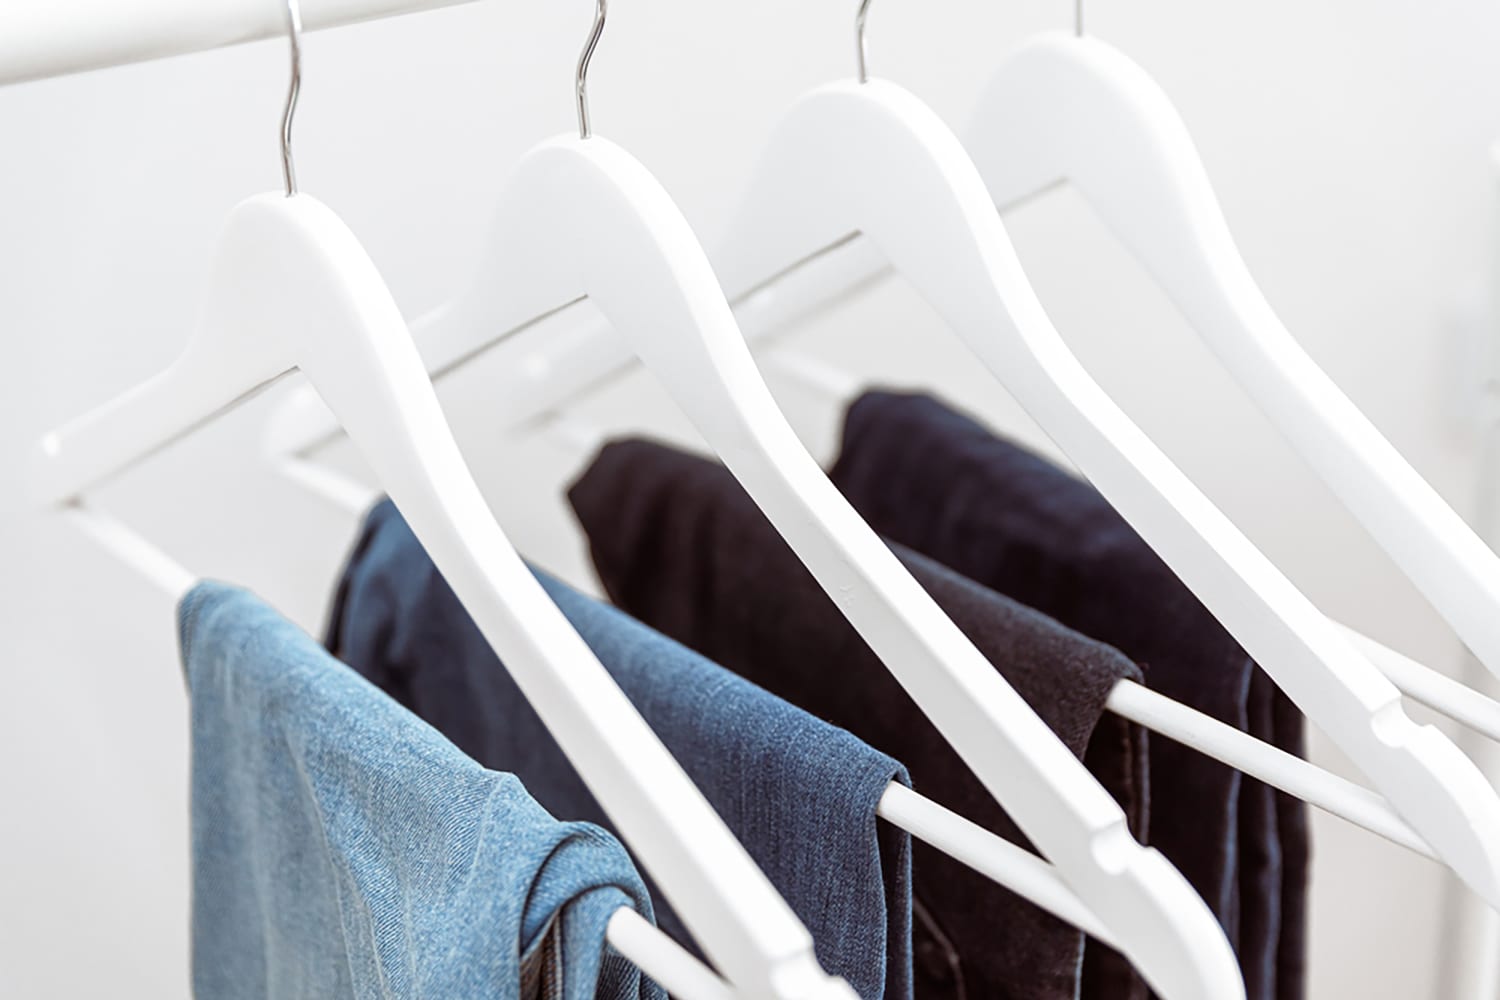 How to Hang Jeans in the Closet (9 Easy Methods)